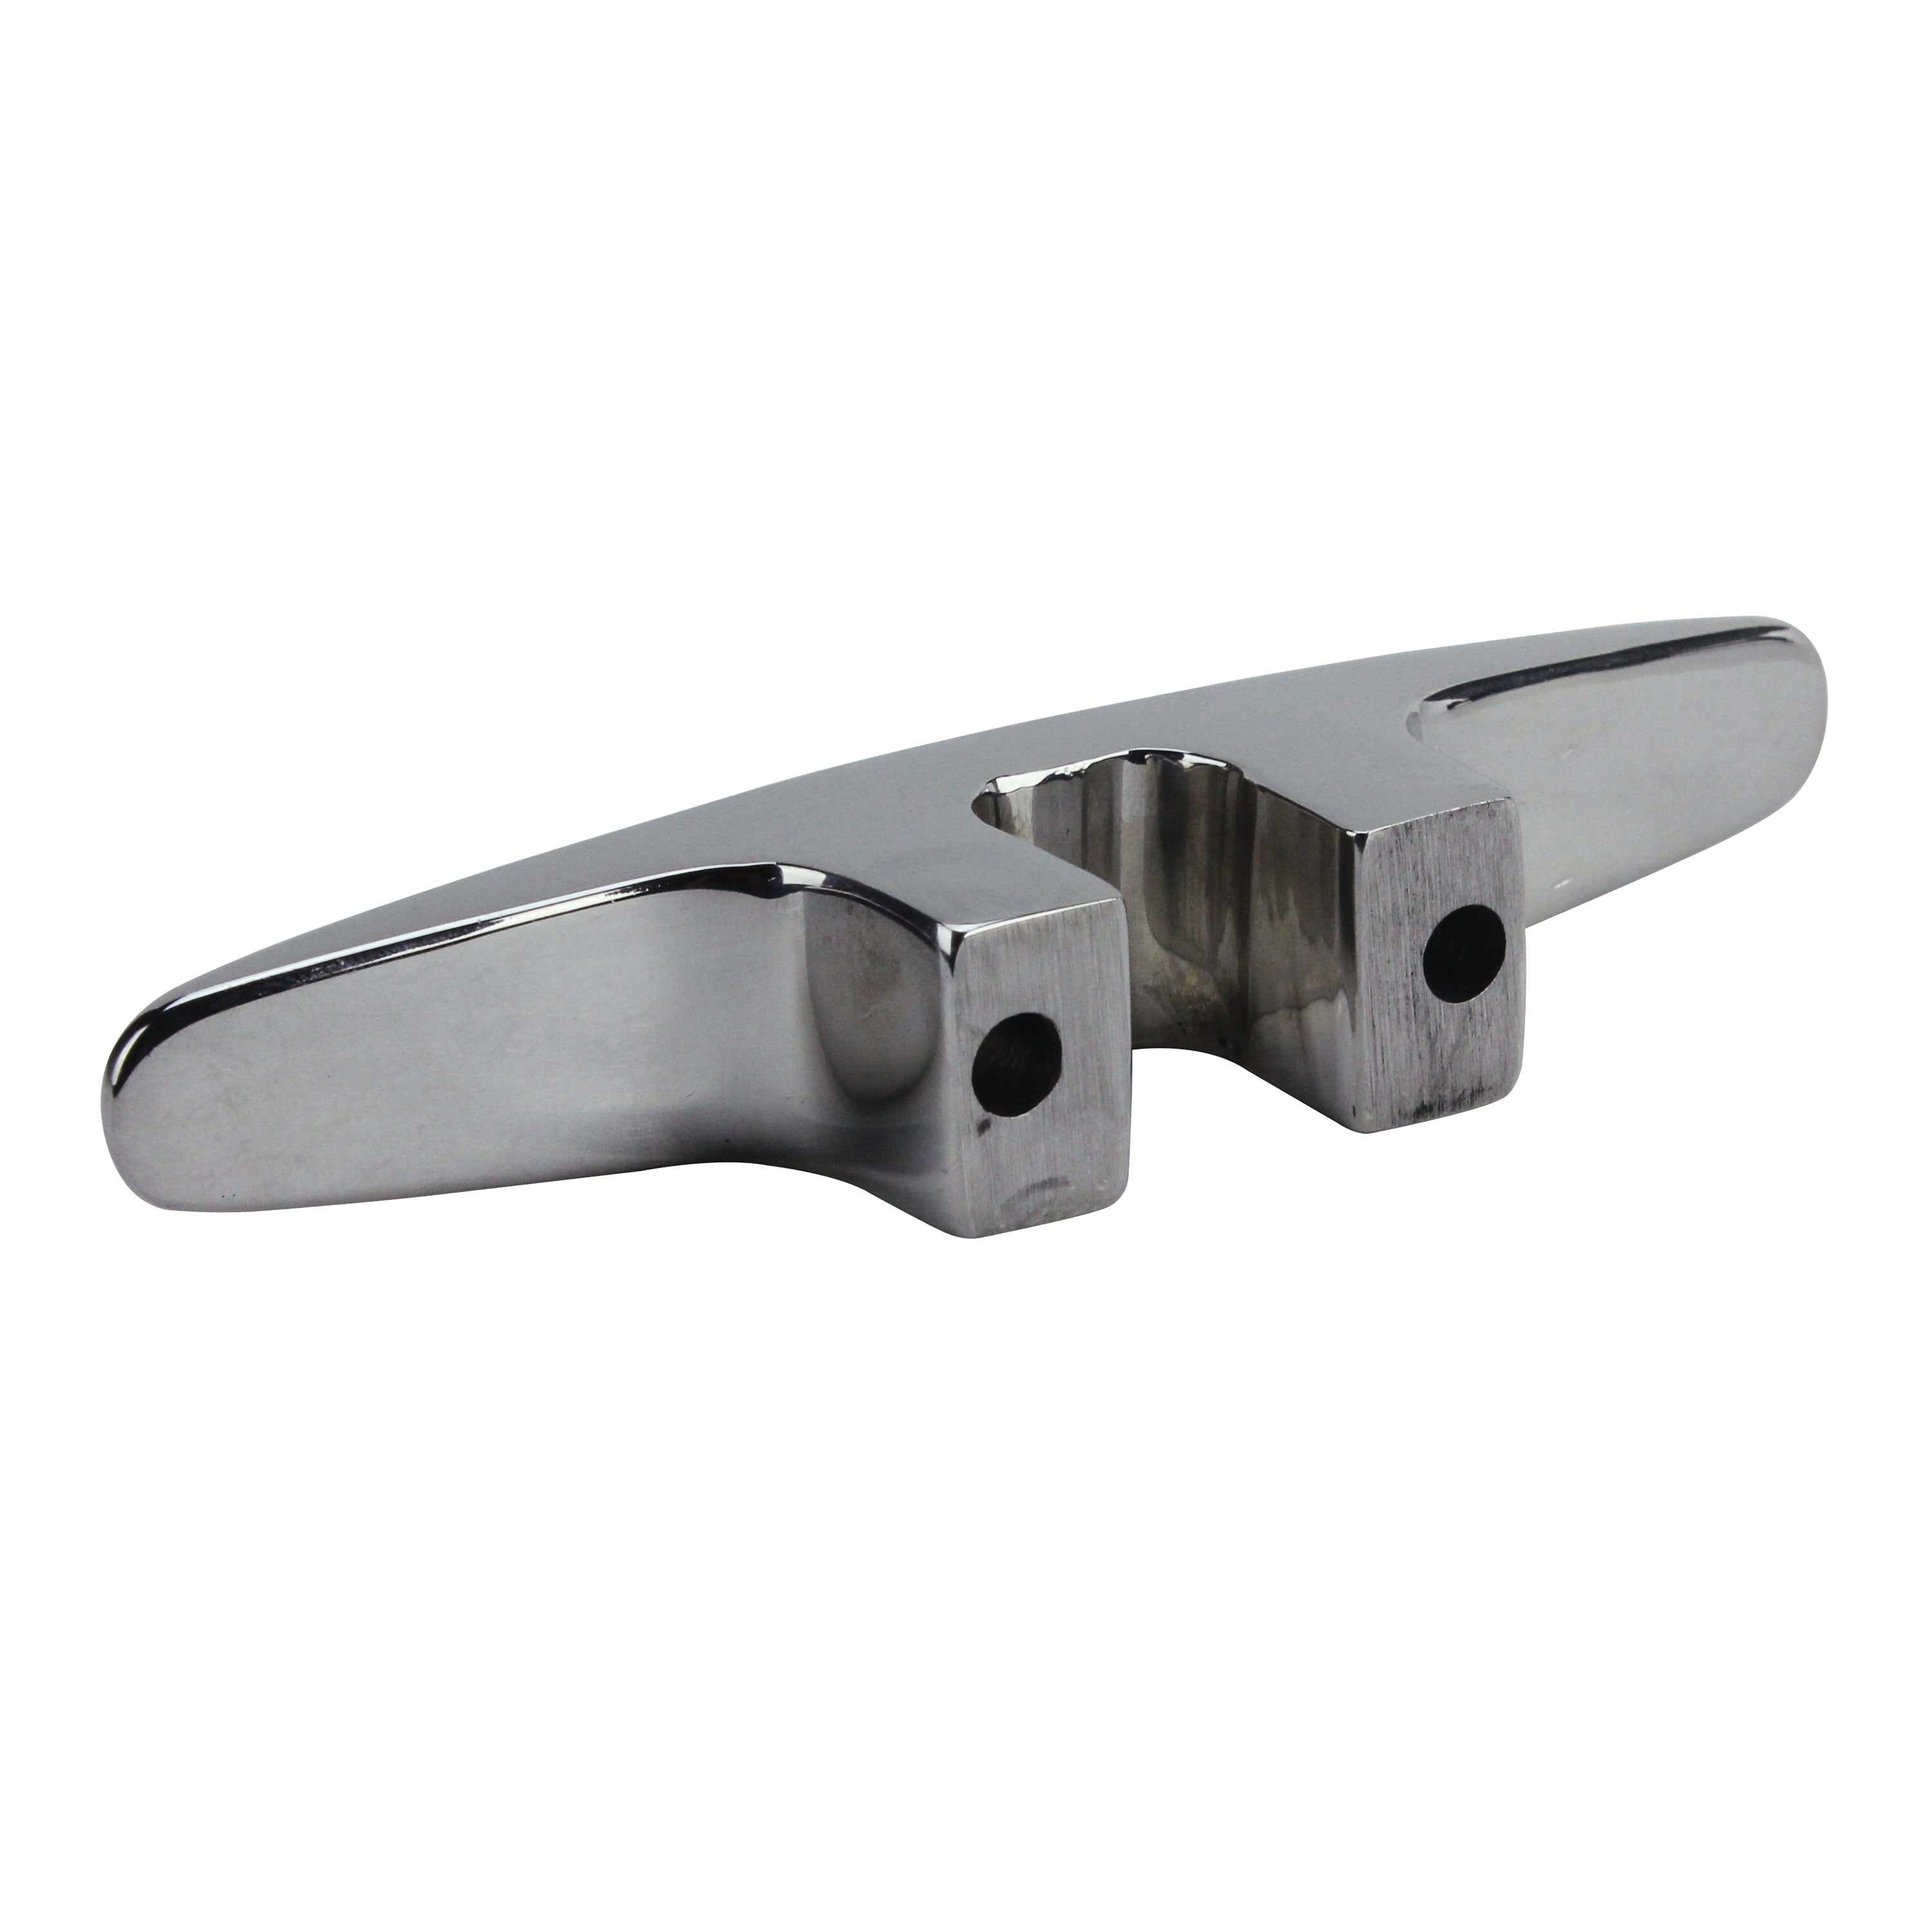 Extreme Max 3006.6759.2 Soft Point Stainless Steel Dock Cleat - 4.5", Value 2-Pack